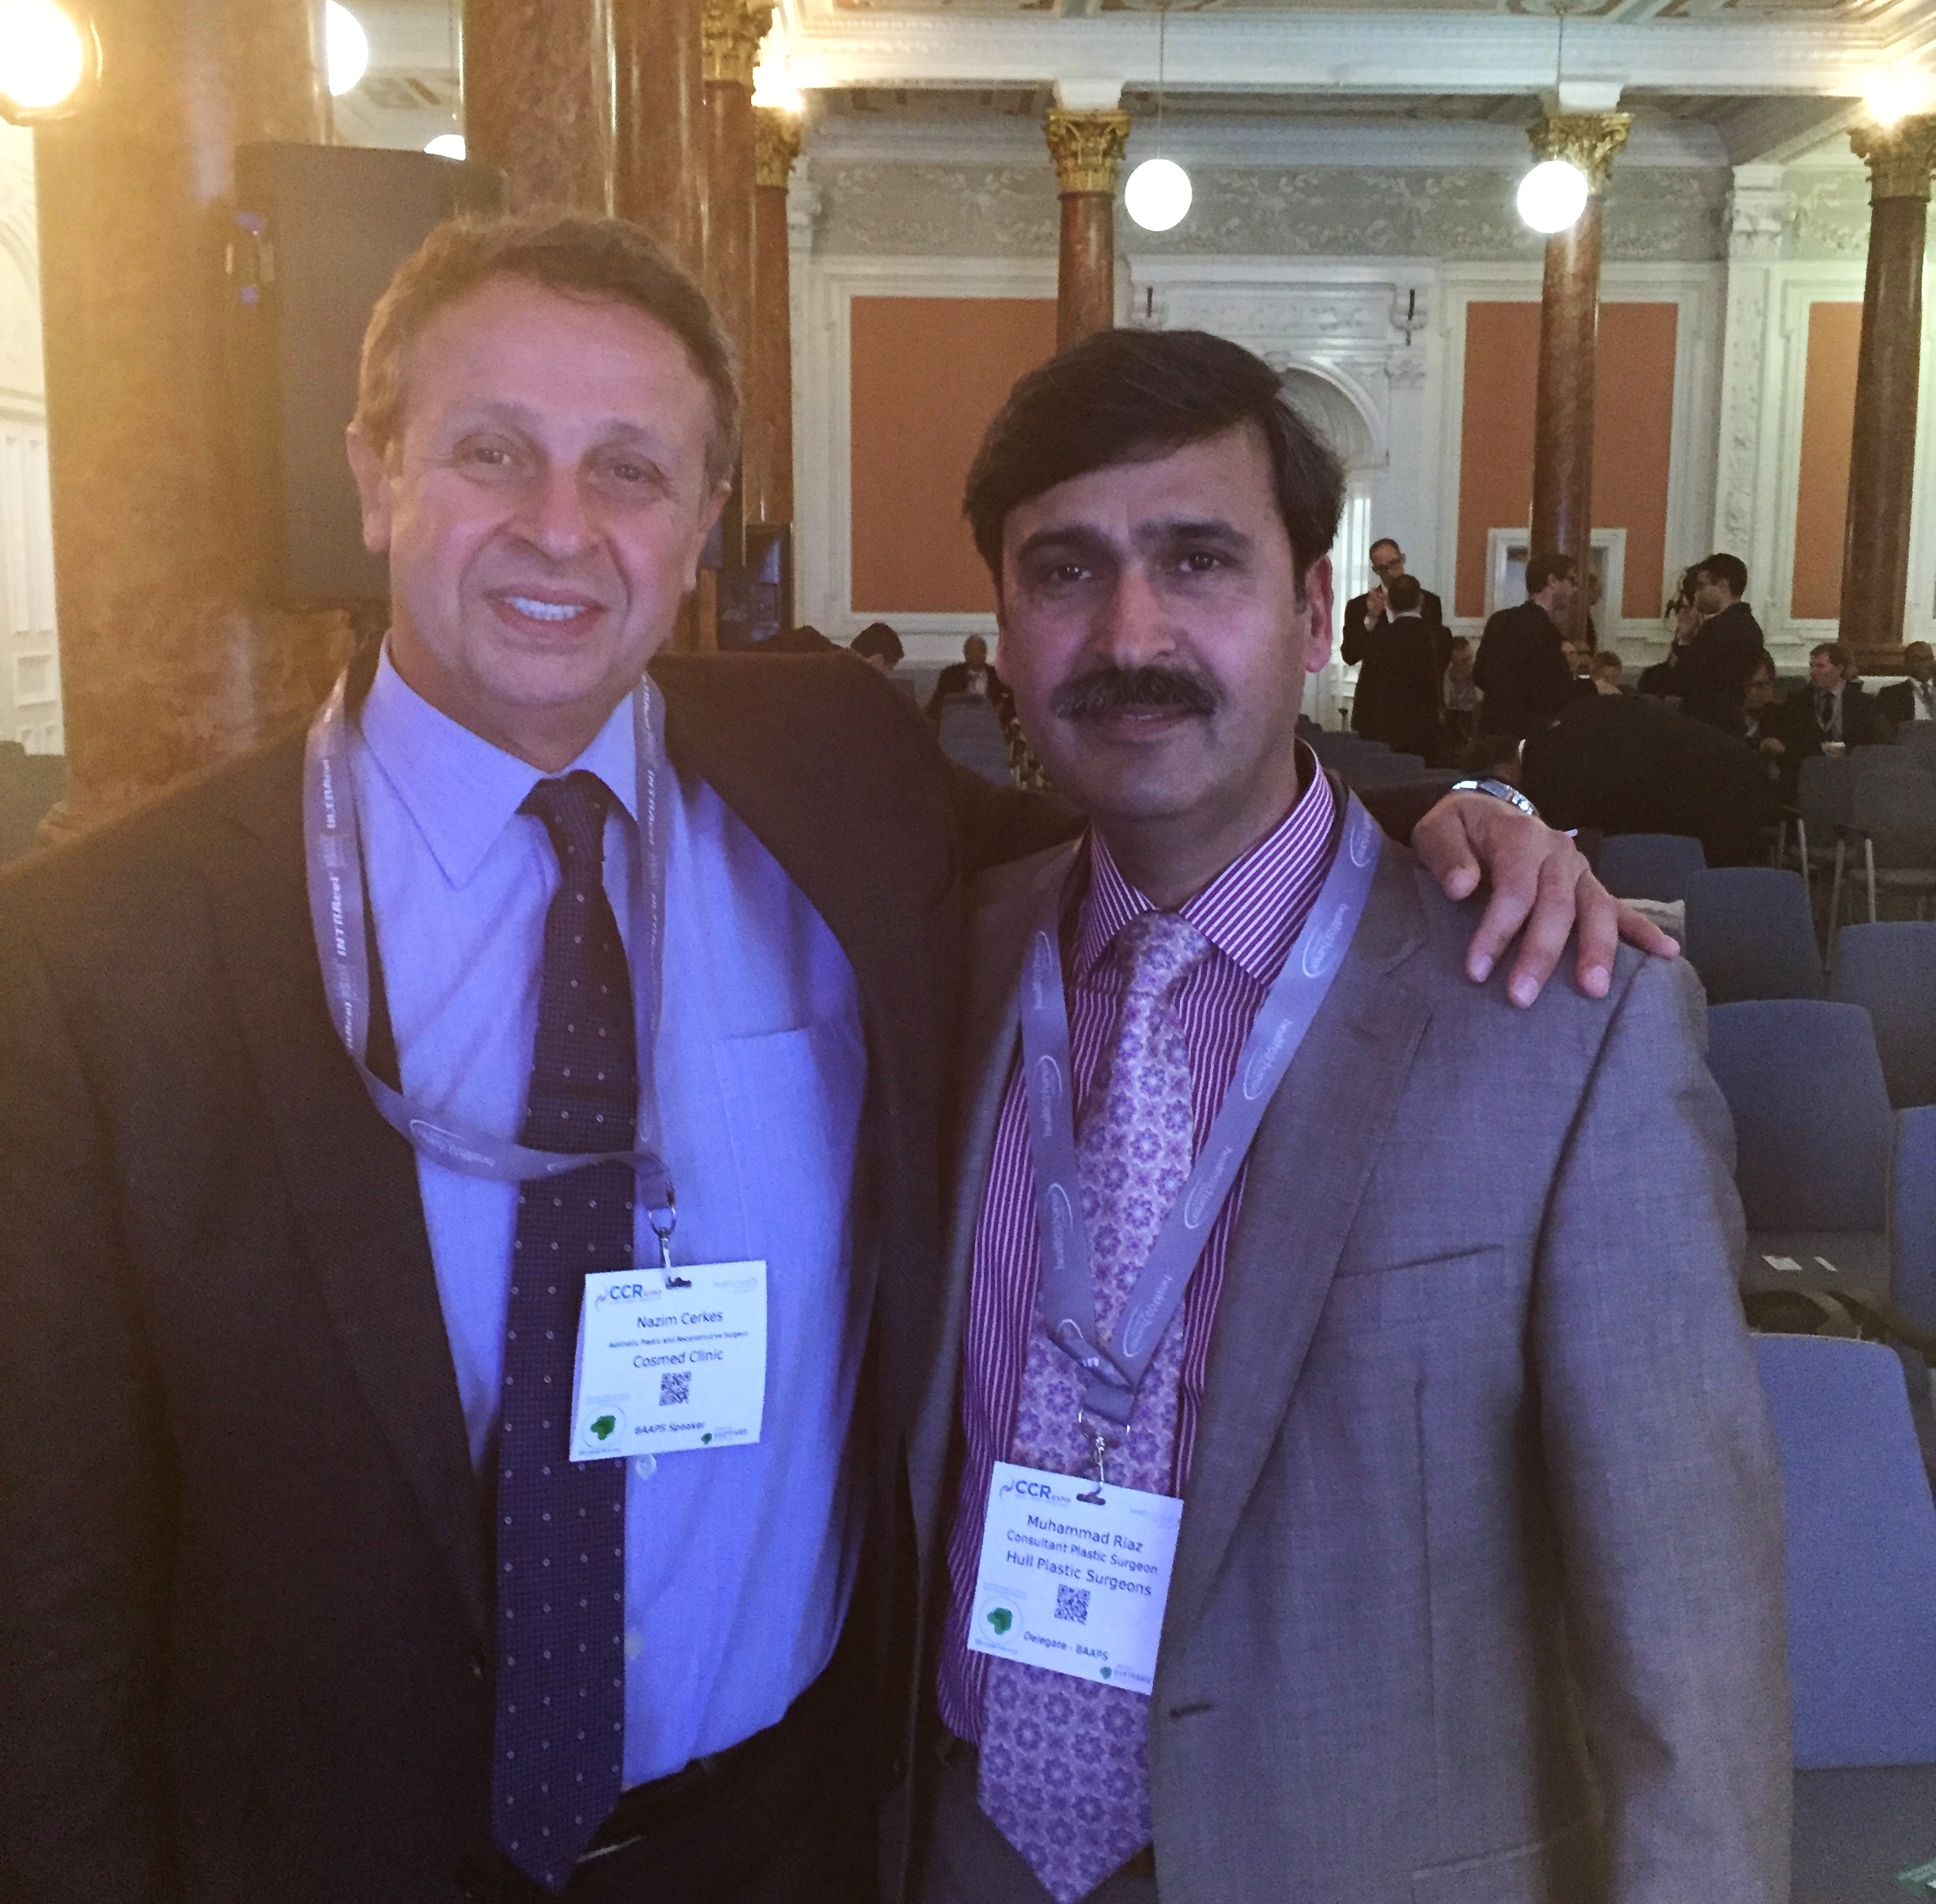 This is Mr Riaz pictured with Professor Cerkes at the conference this year.